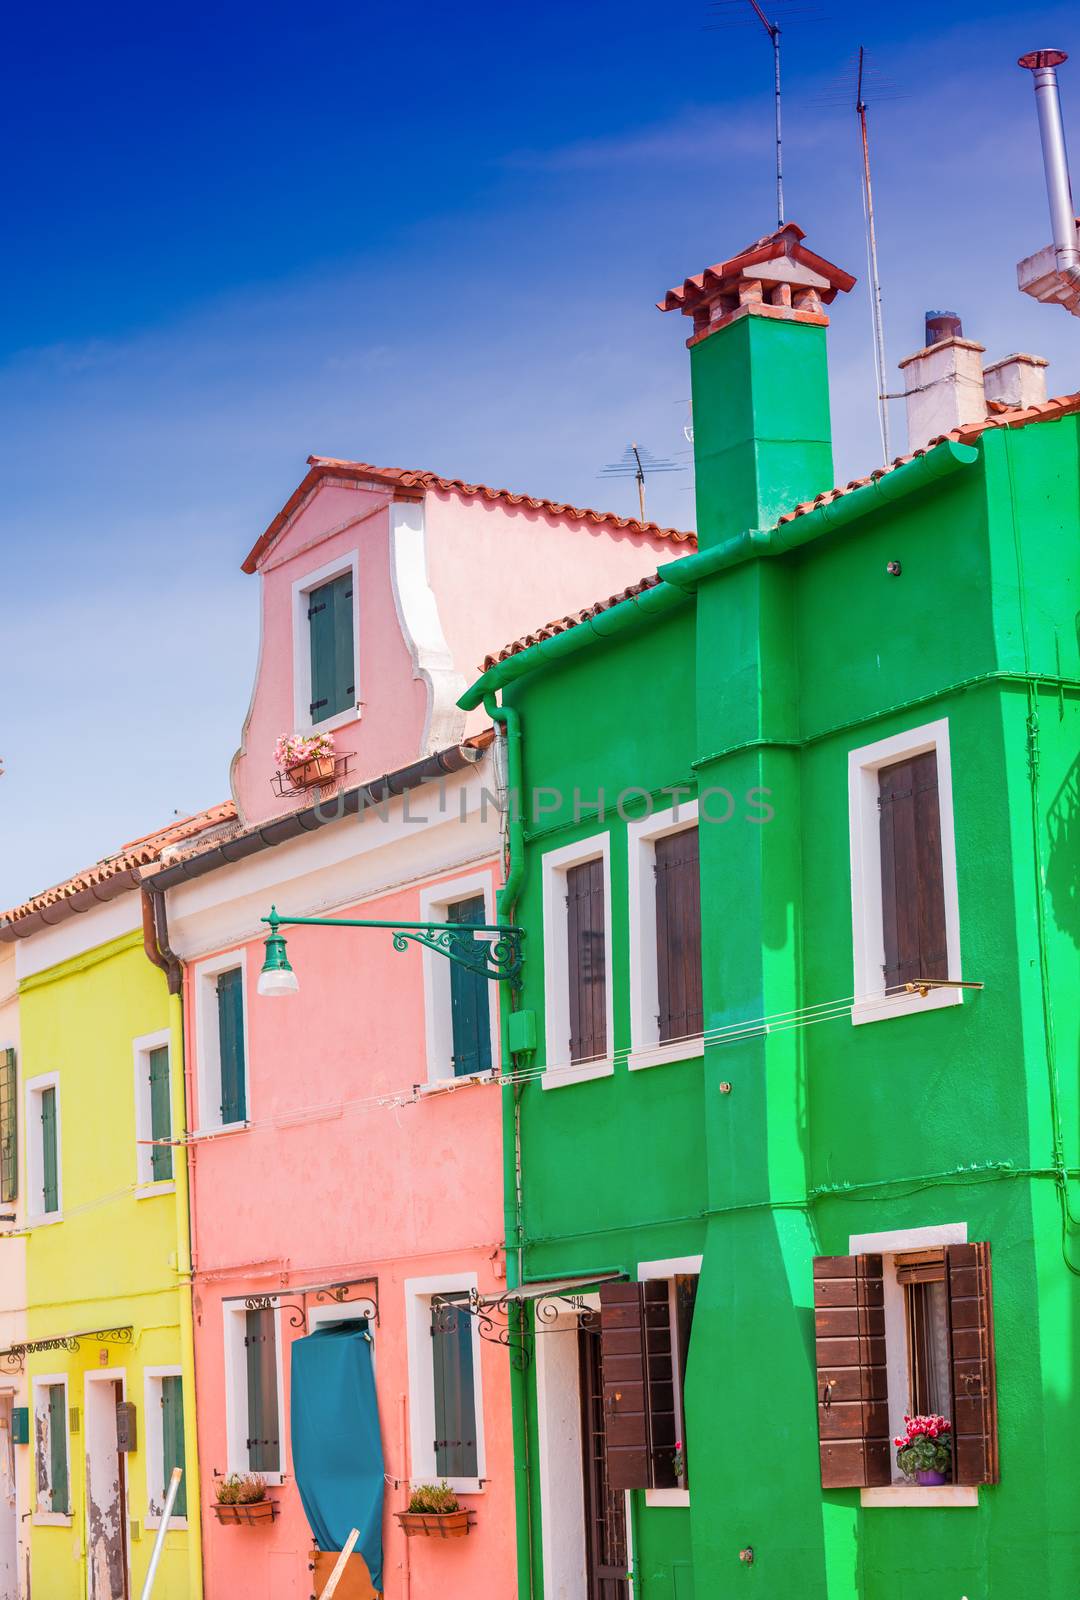 Burano colors, Italy by jovannig